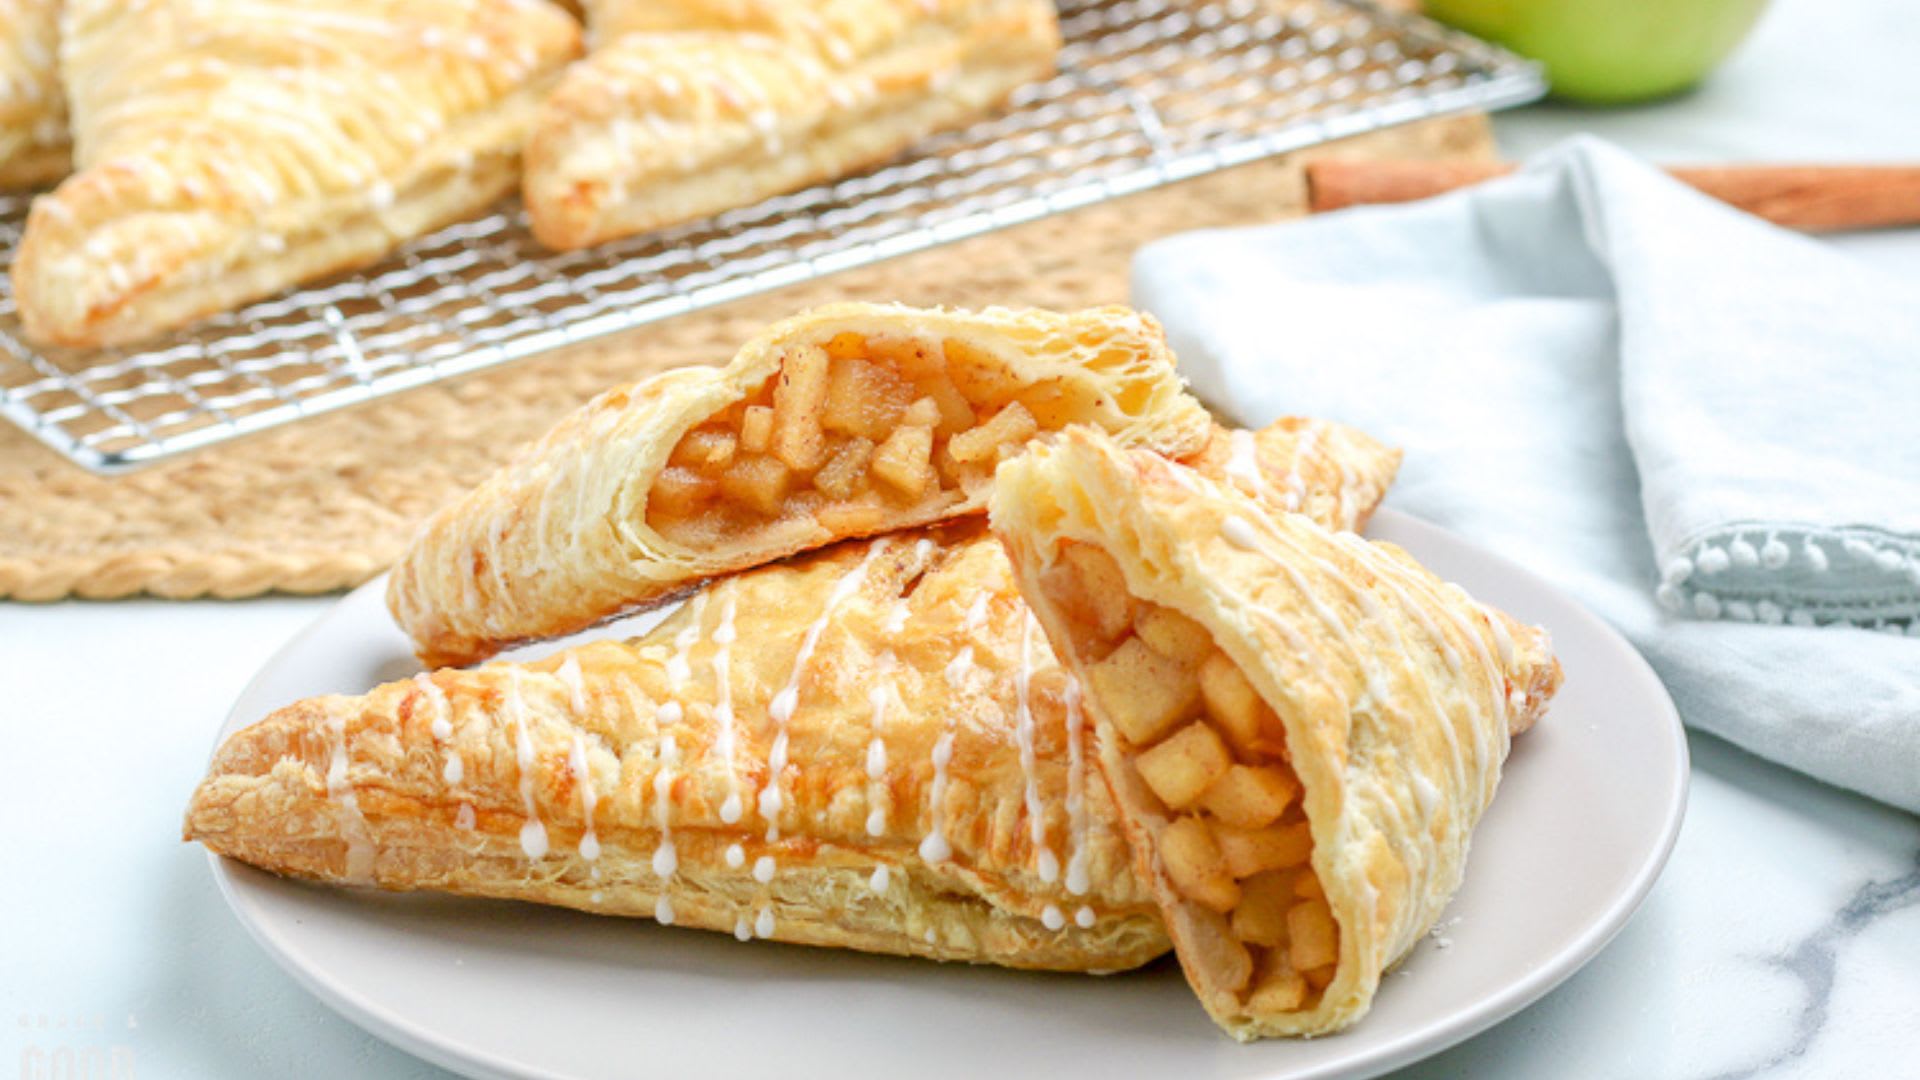 Apple Turnovers Recipe (Easy With Puff Pastry)